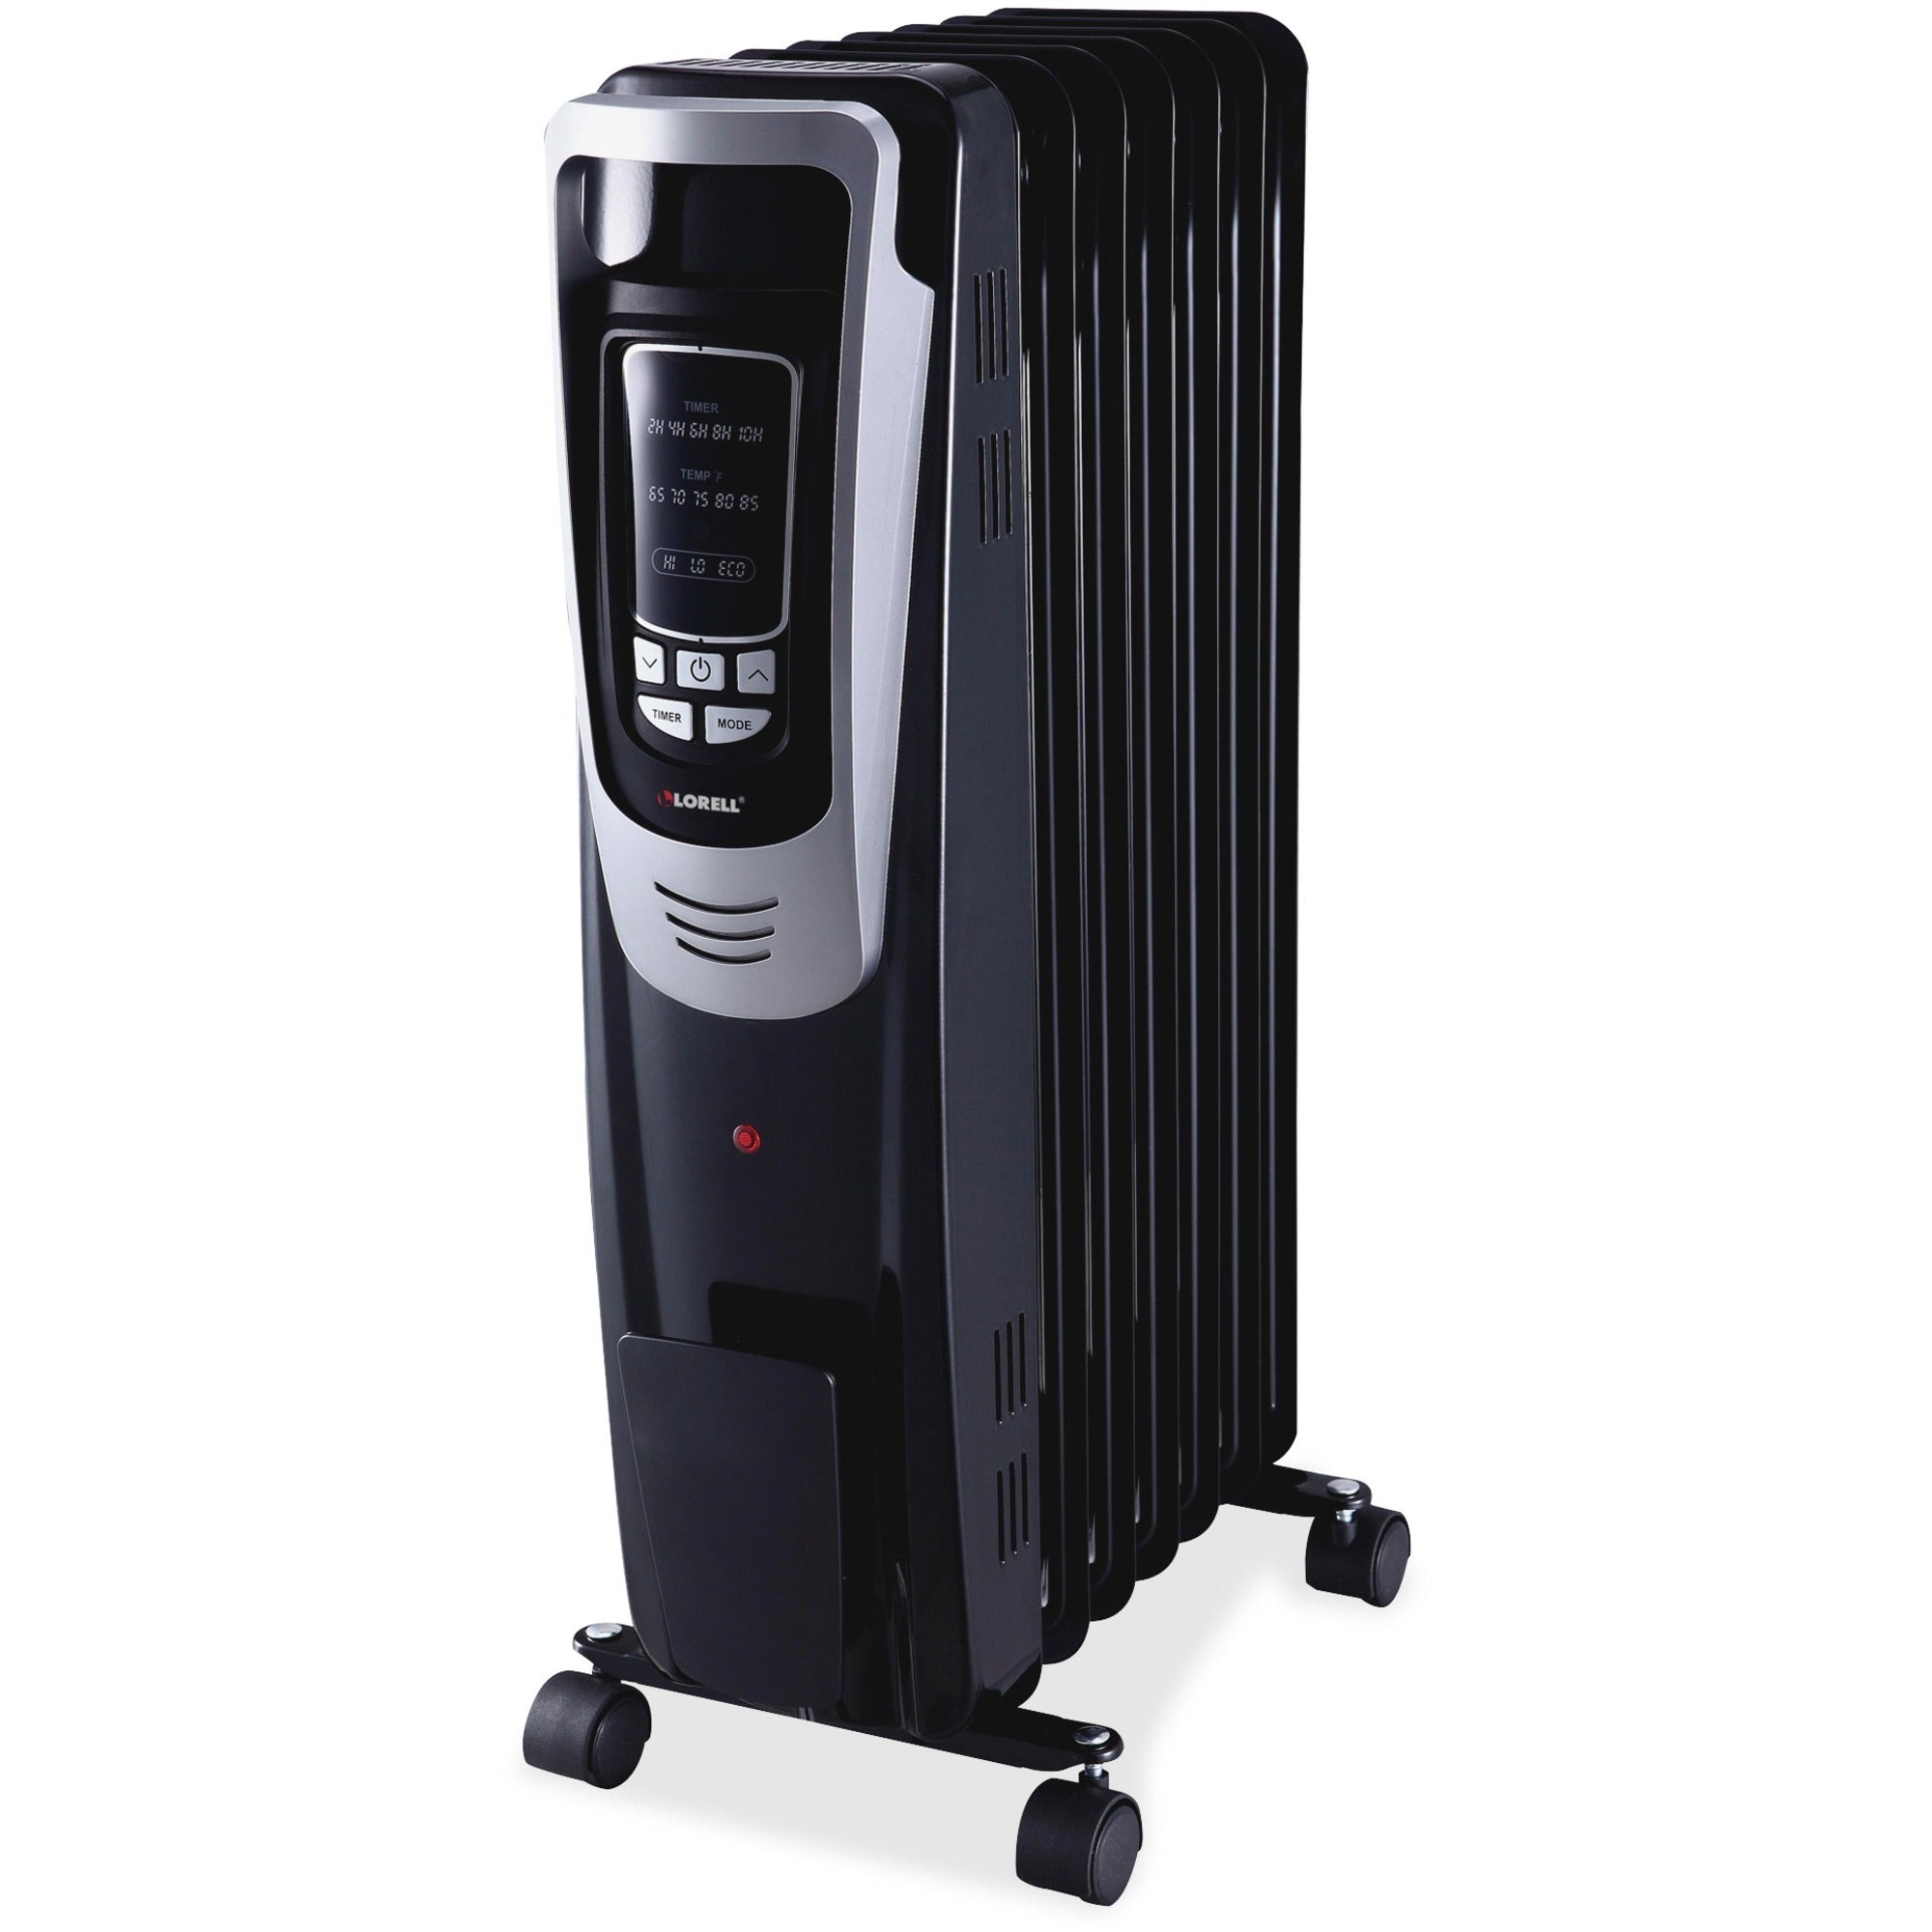 Lorell LED Display Mobile Radiator Heater - Electric - Electric - 600 W to 1500 W - 3 x Heat Settings - 150 Sq. ft. Coverage Area - 1500 W - Black - 